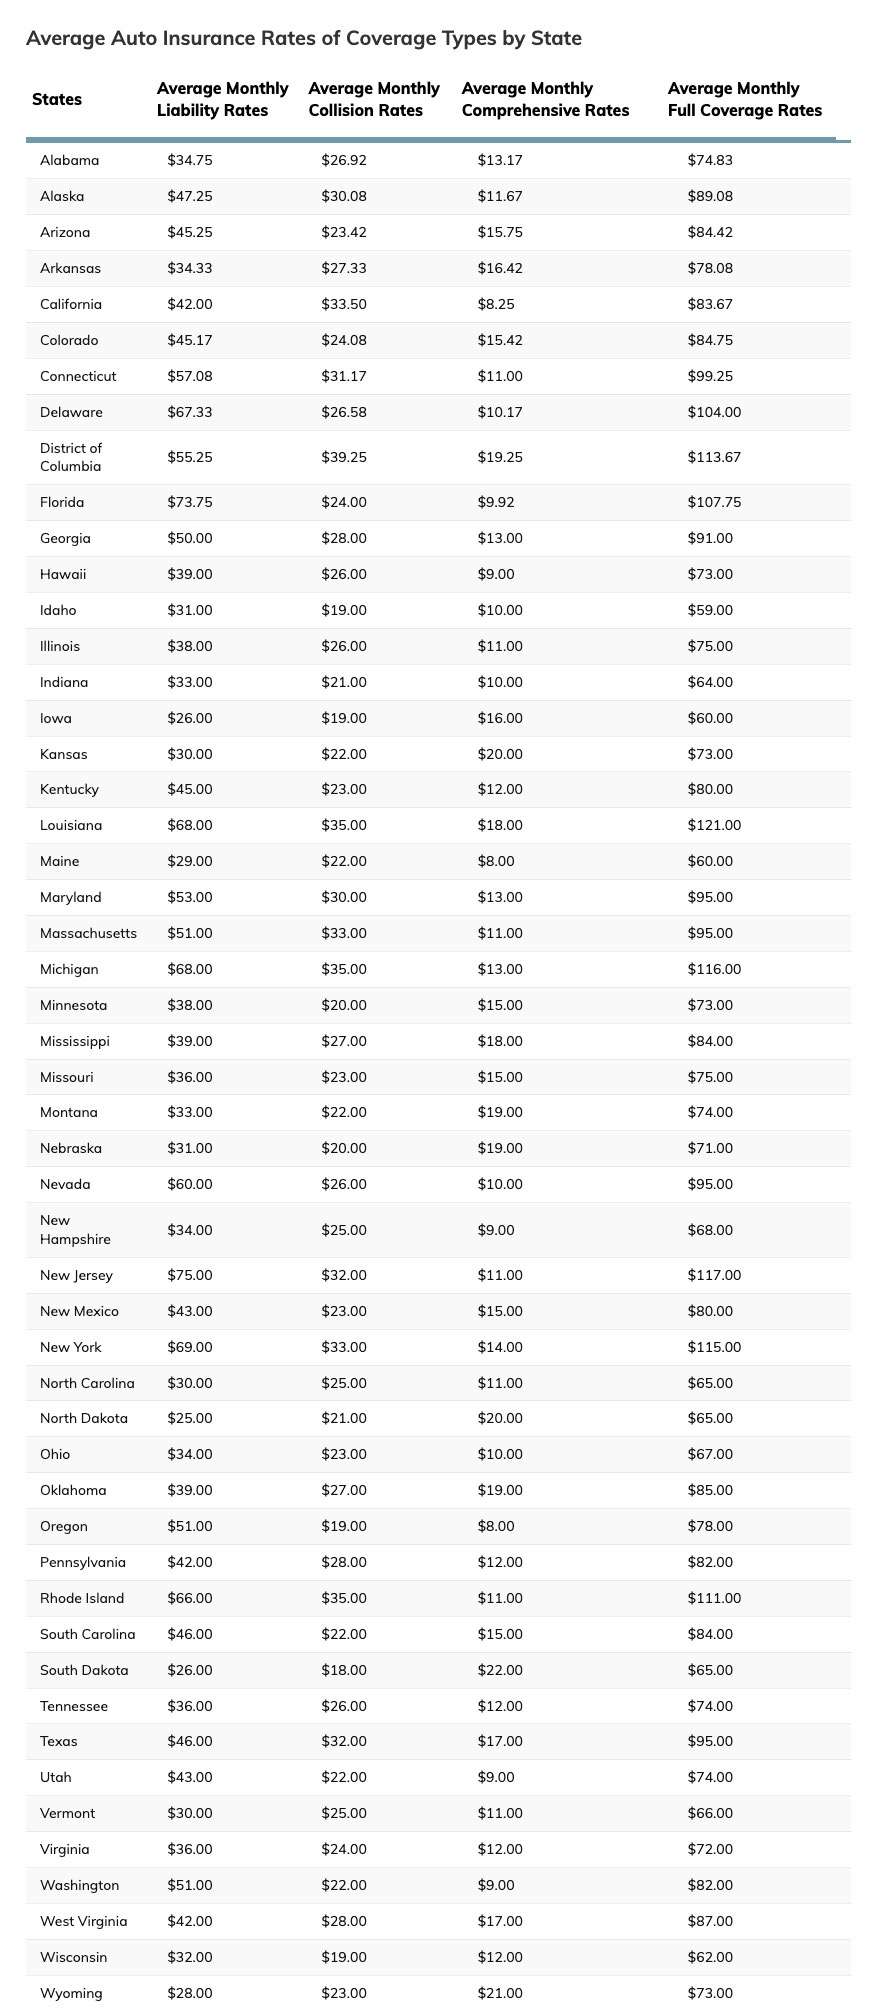 standard rates for auto insurance based on coverage type in each state